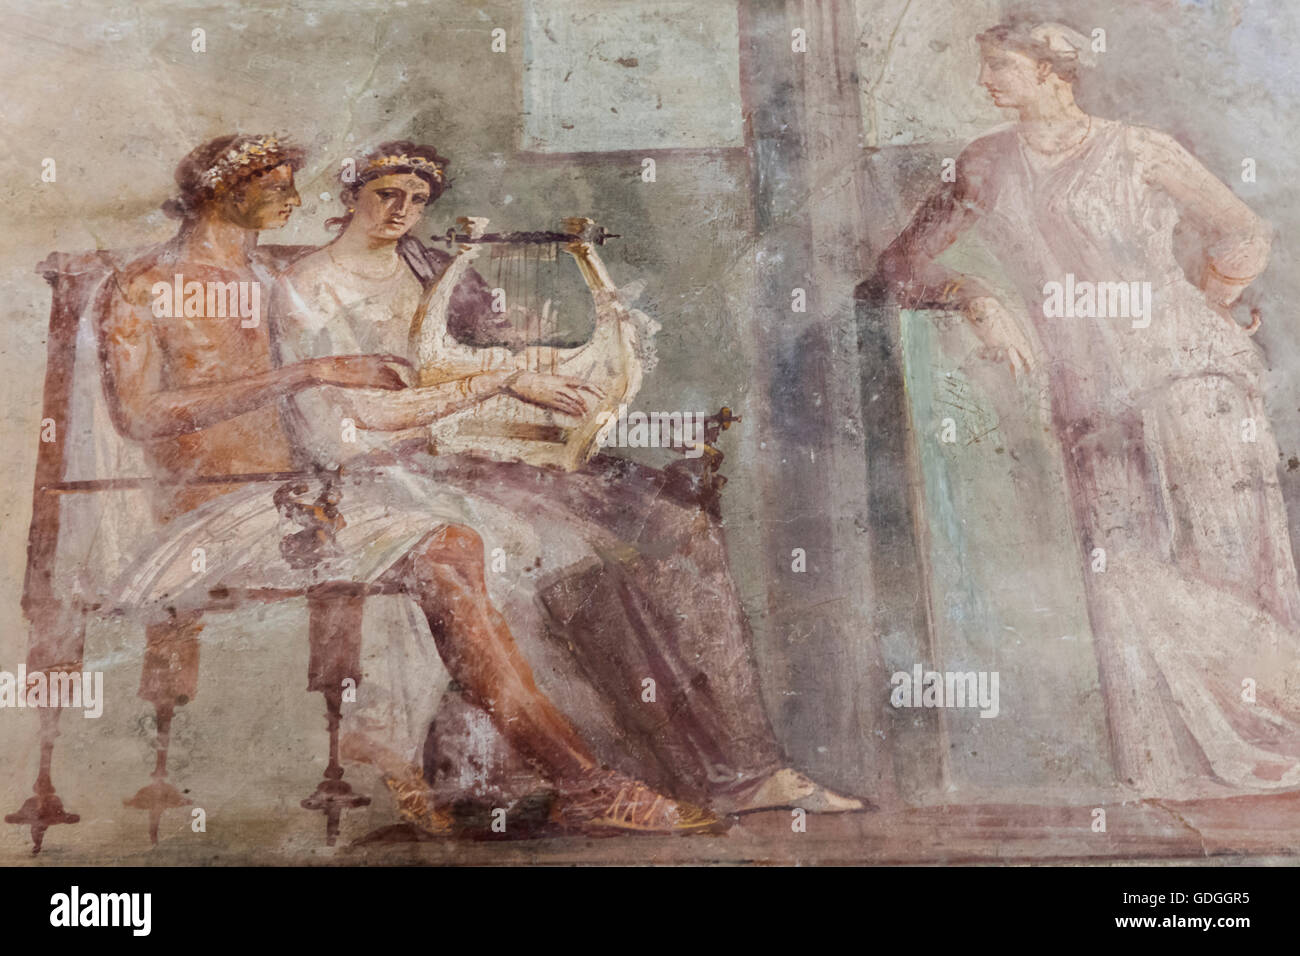 England,London,British Museum,Roman Empire Room,Roman Fresco of a Woman Playing the Lyre from Pompeii dated AD 50-79 Stock Photo